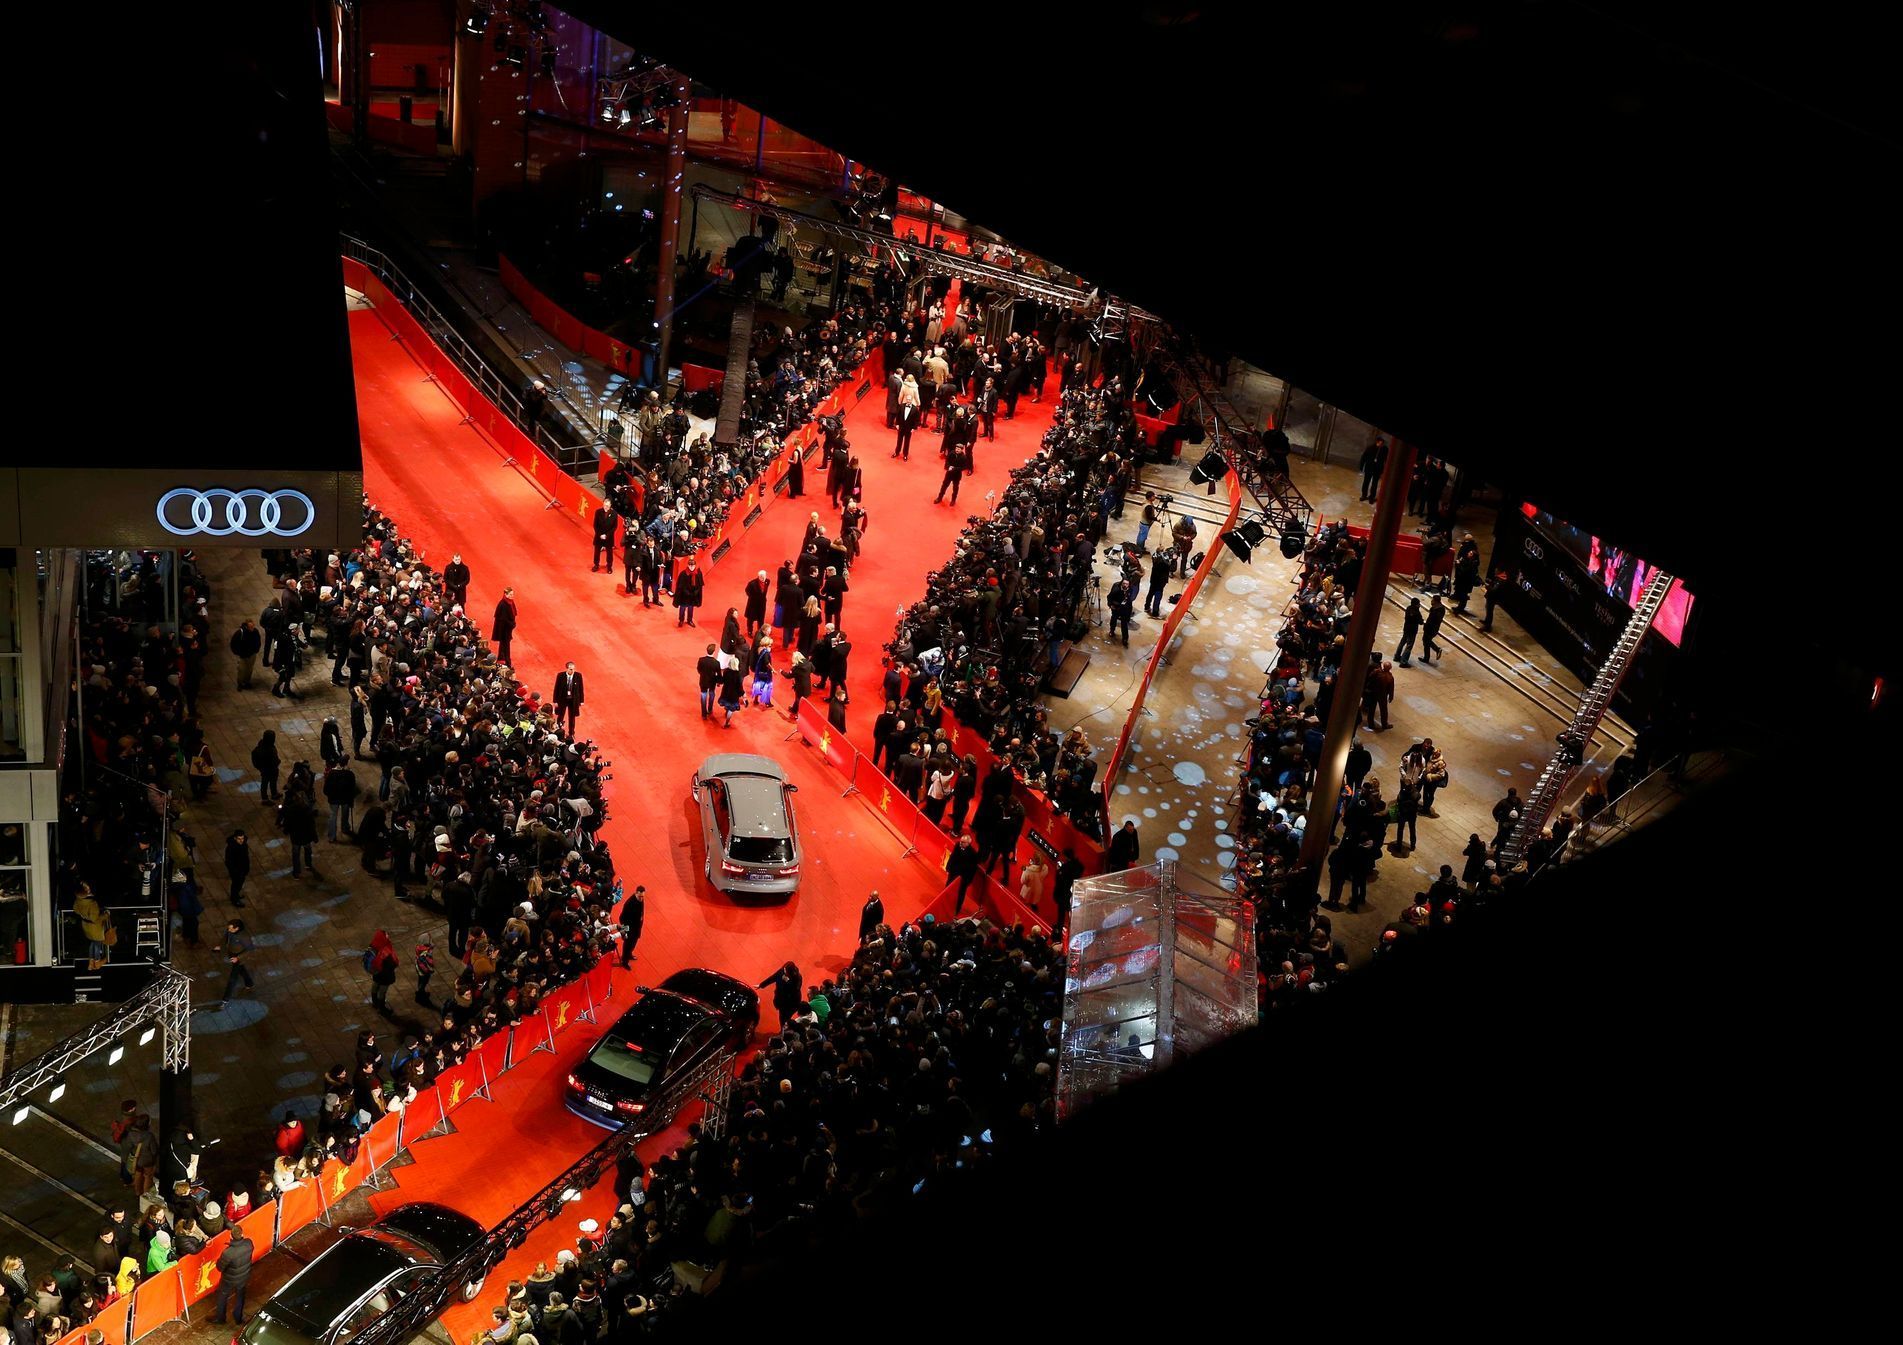 General view of guests arriving for screening during opening gala of 65th Berlinale International Film Festival in Berlin